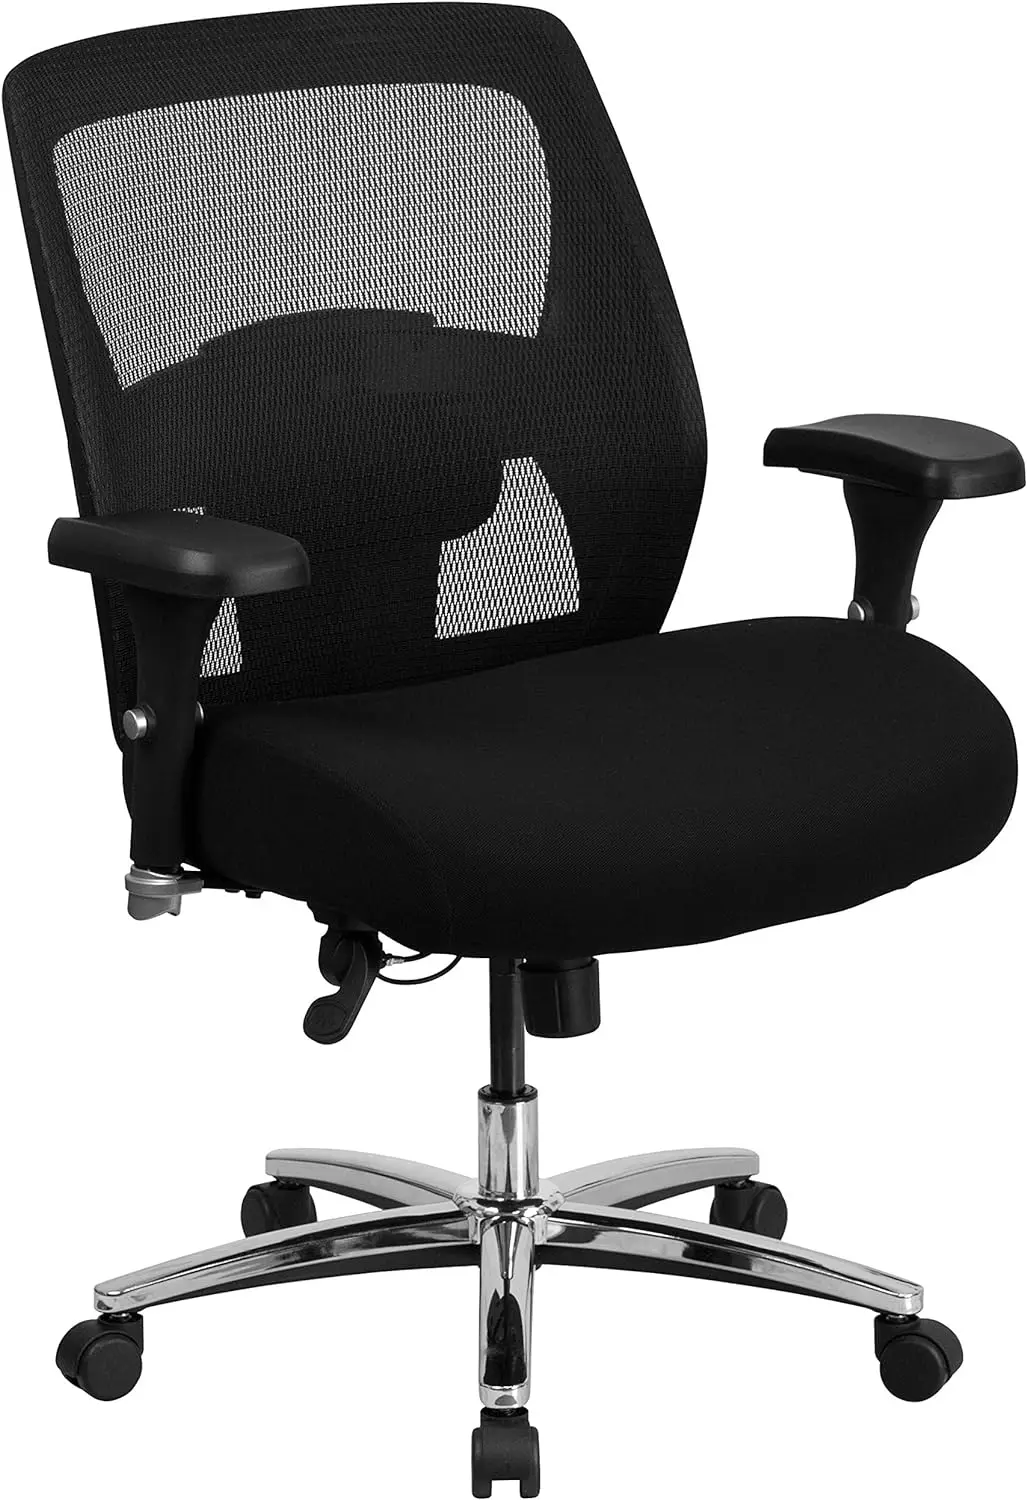 

Series 24/7 Intensive Use Big & Tall 500 lb. Rated Black Mesh Executive Ergonomic Office Chair with Ratchet Back Chair soft for